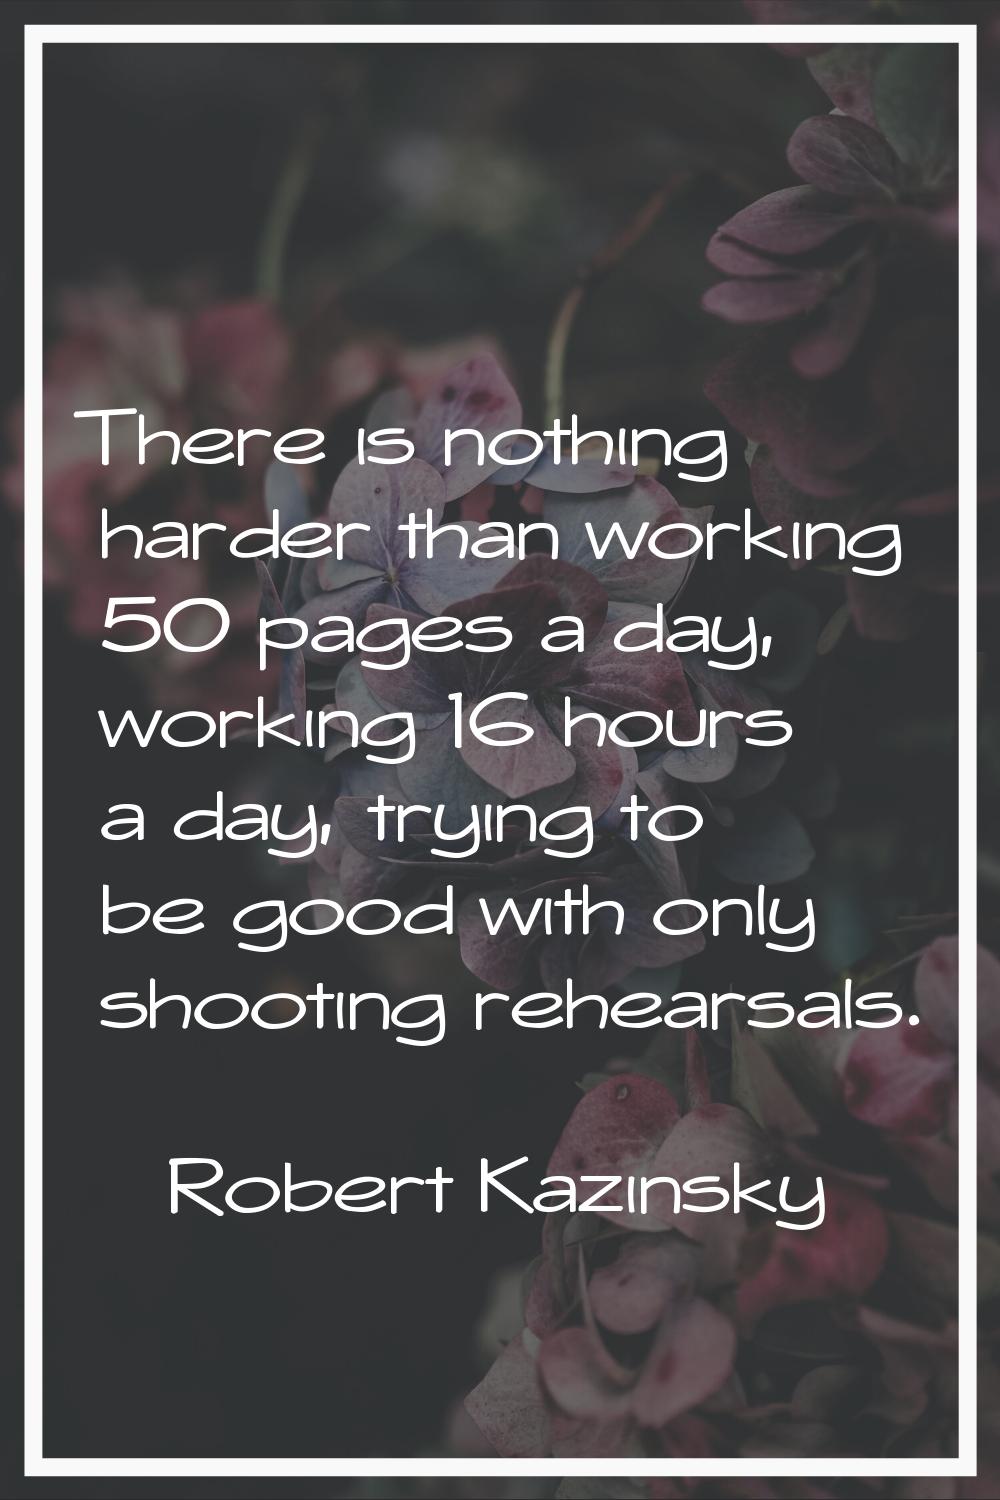 There is nothing harder than working 50 pages a day, working 16 hours a day, trying to be good with